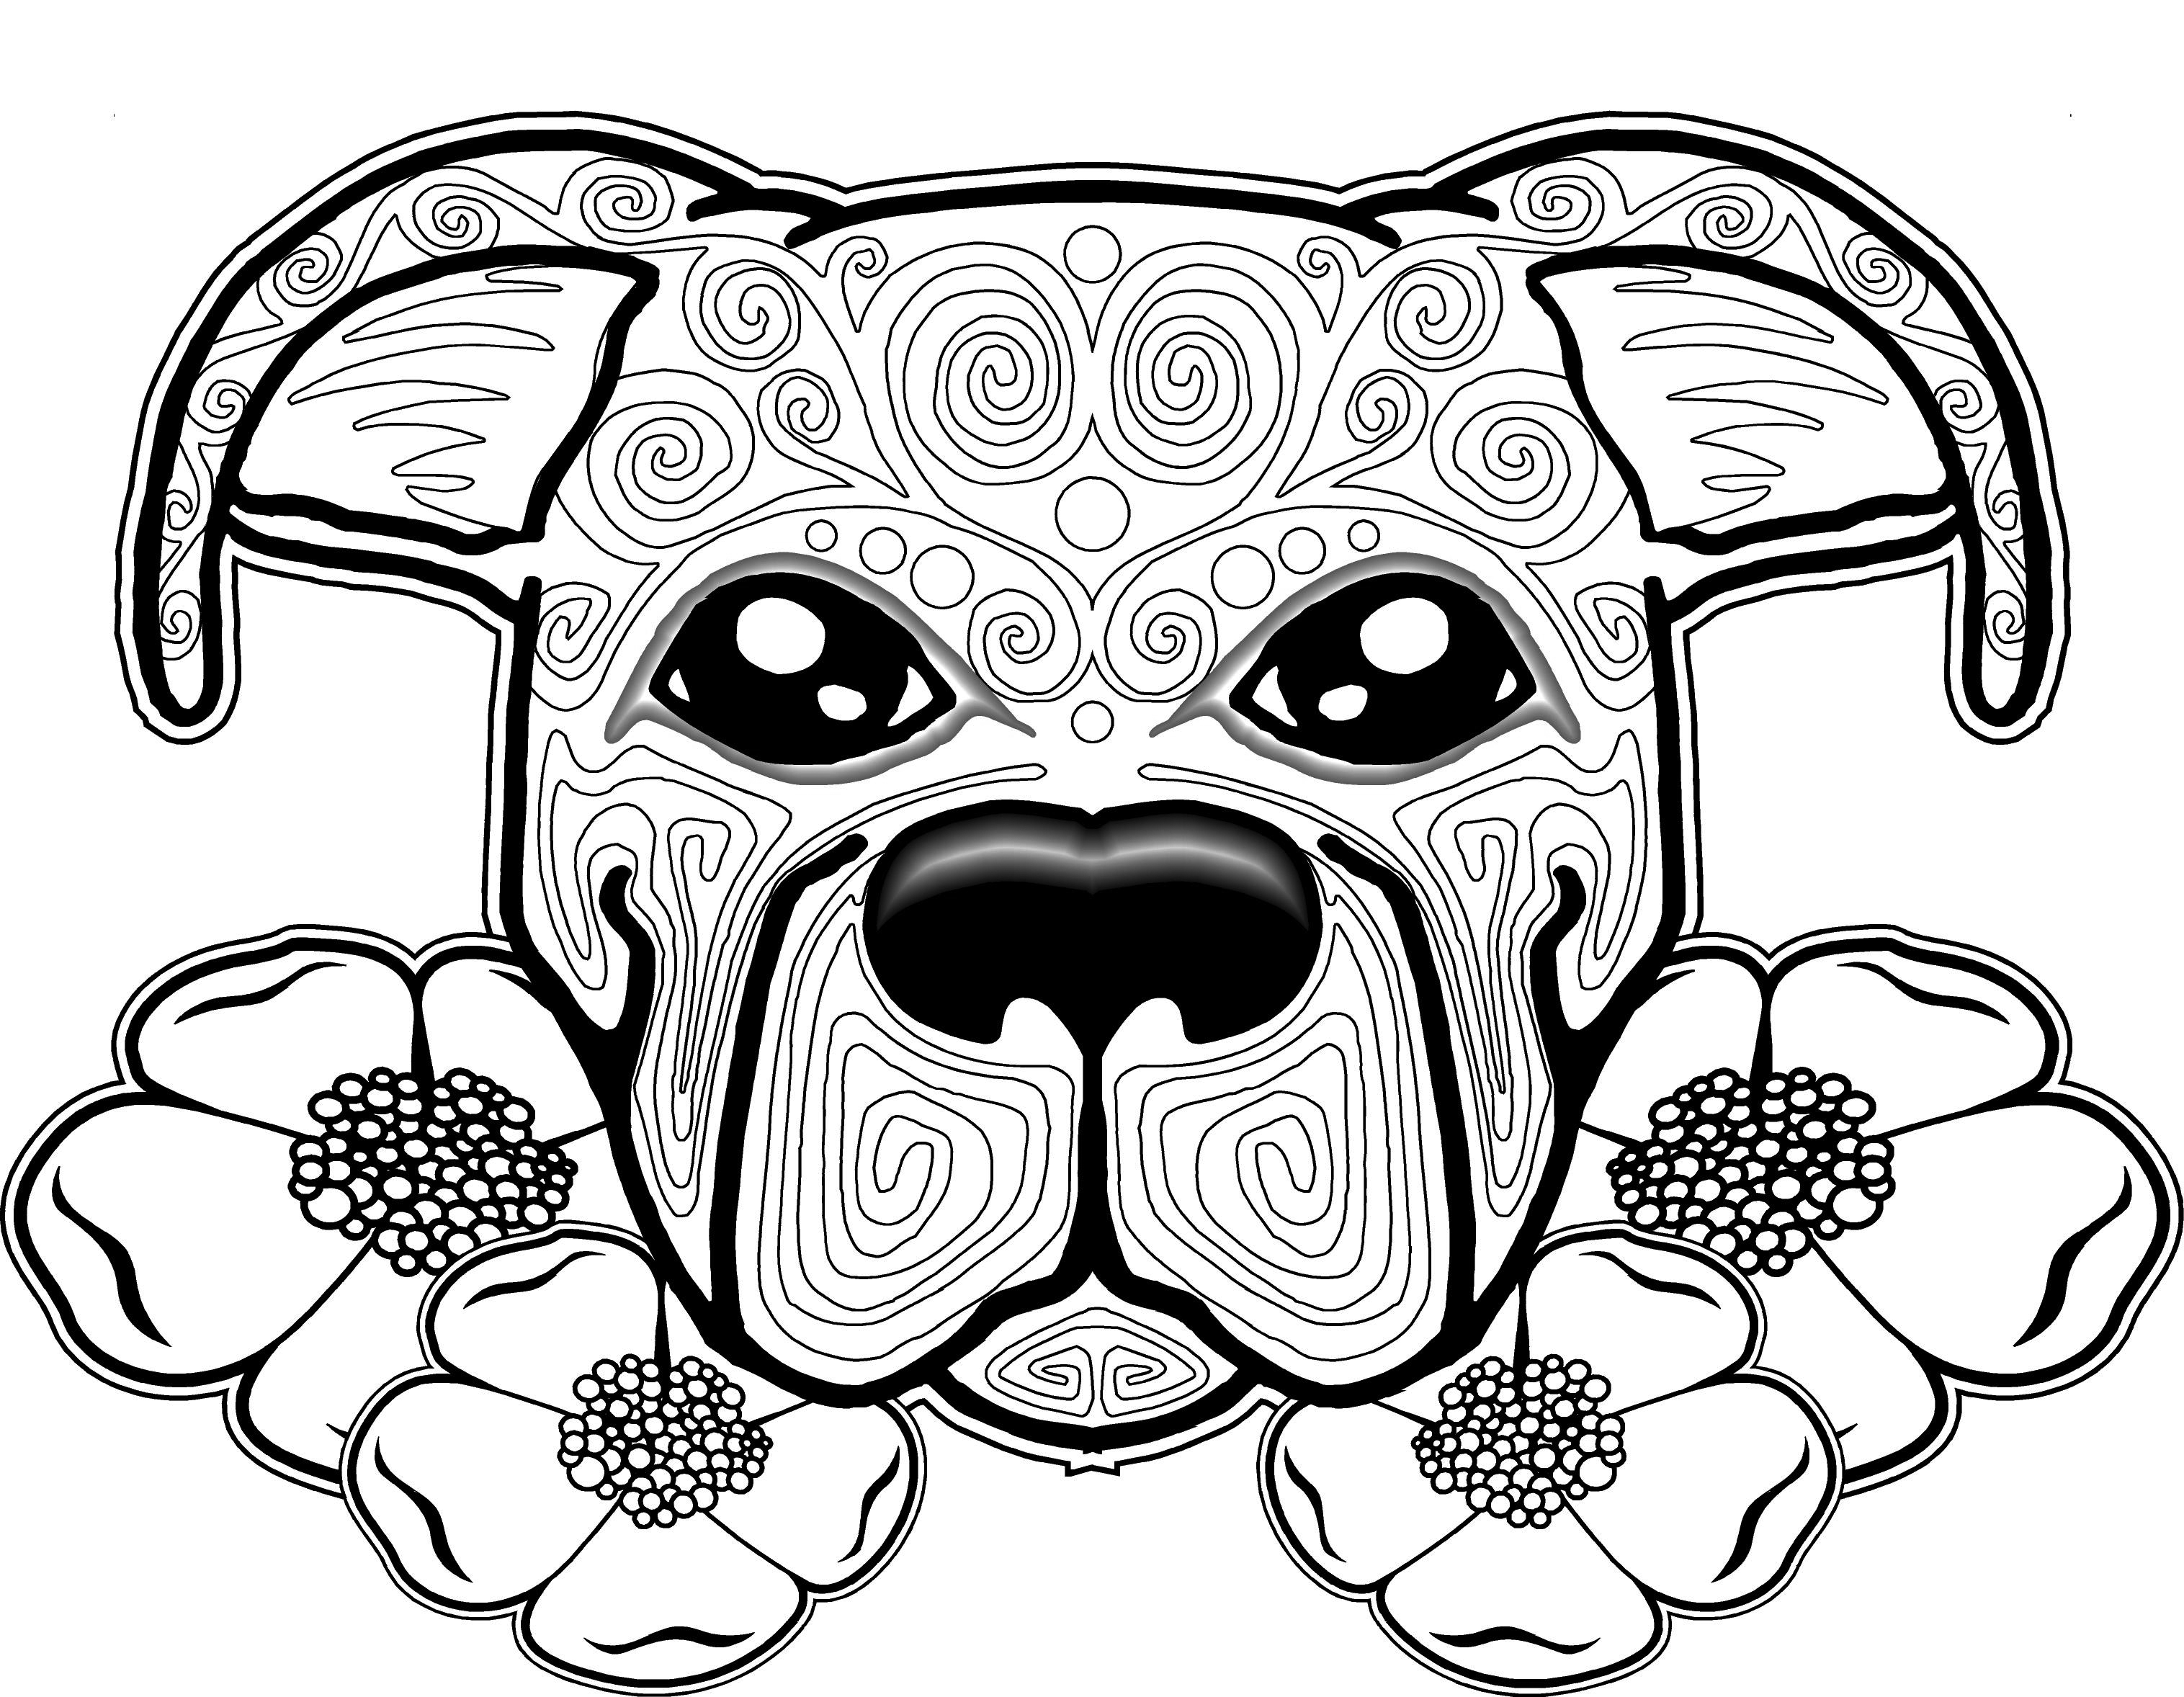 Dog Coloring Pages For Adults at GetDrawings | Free download